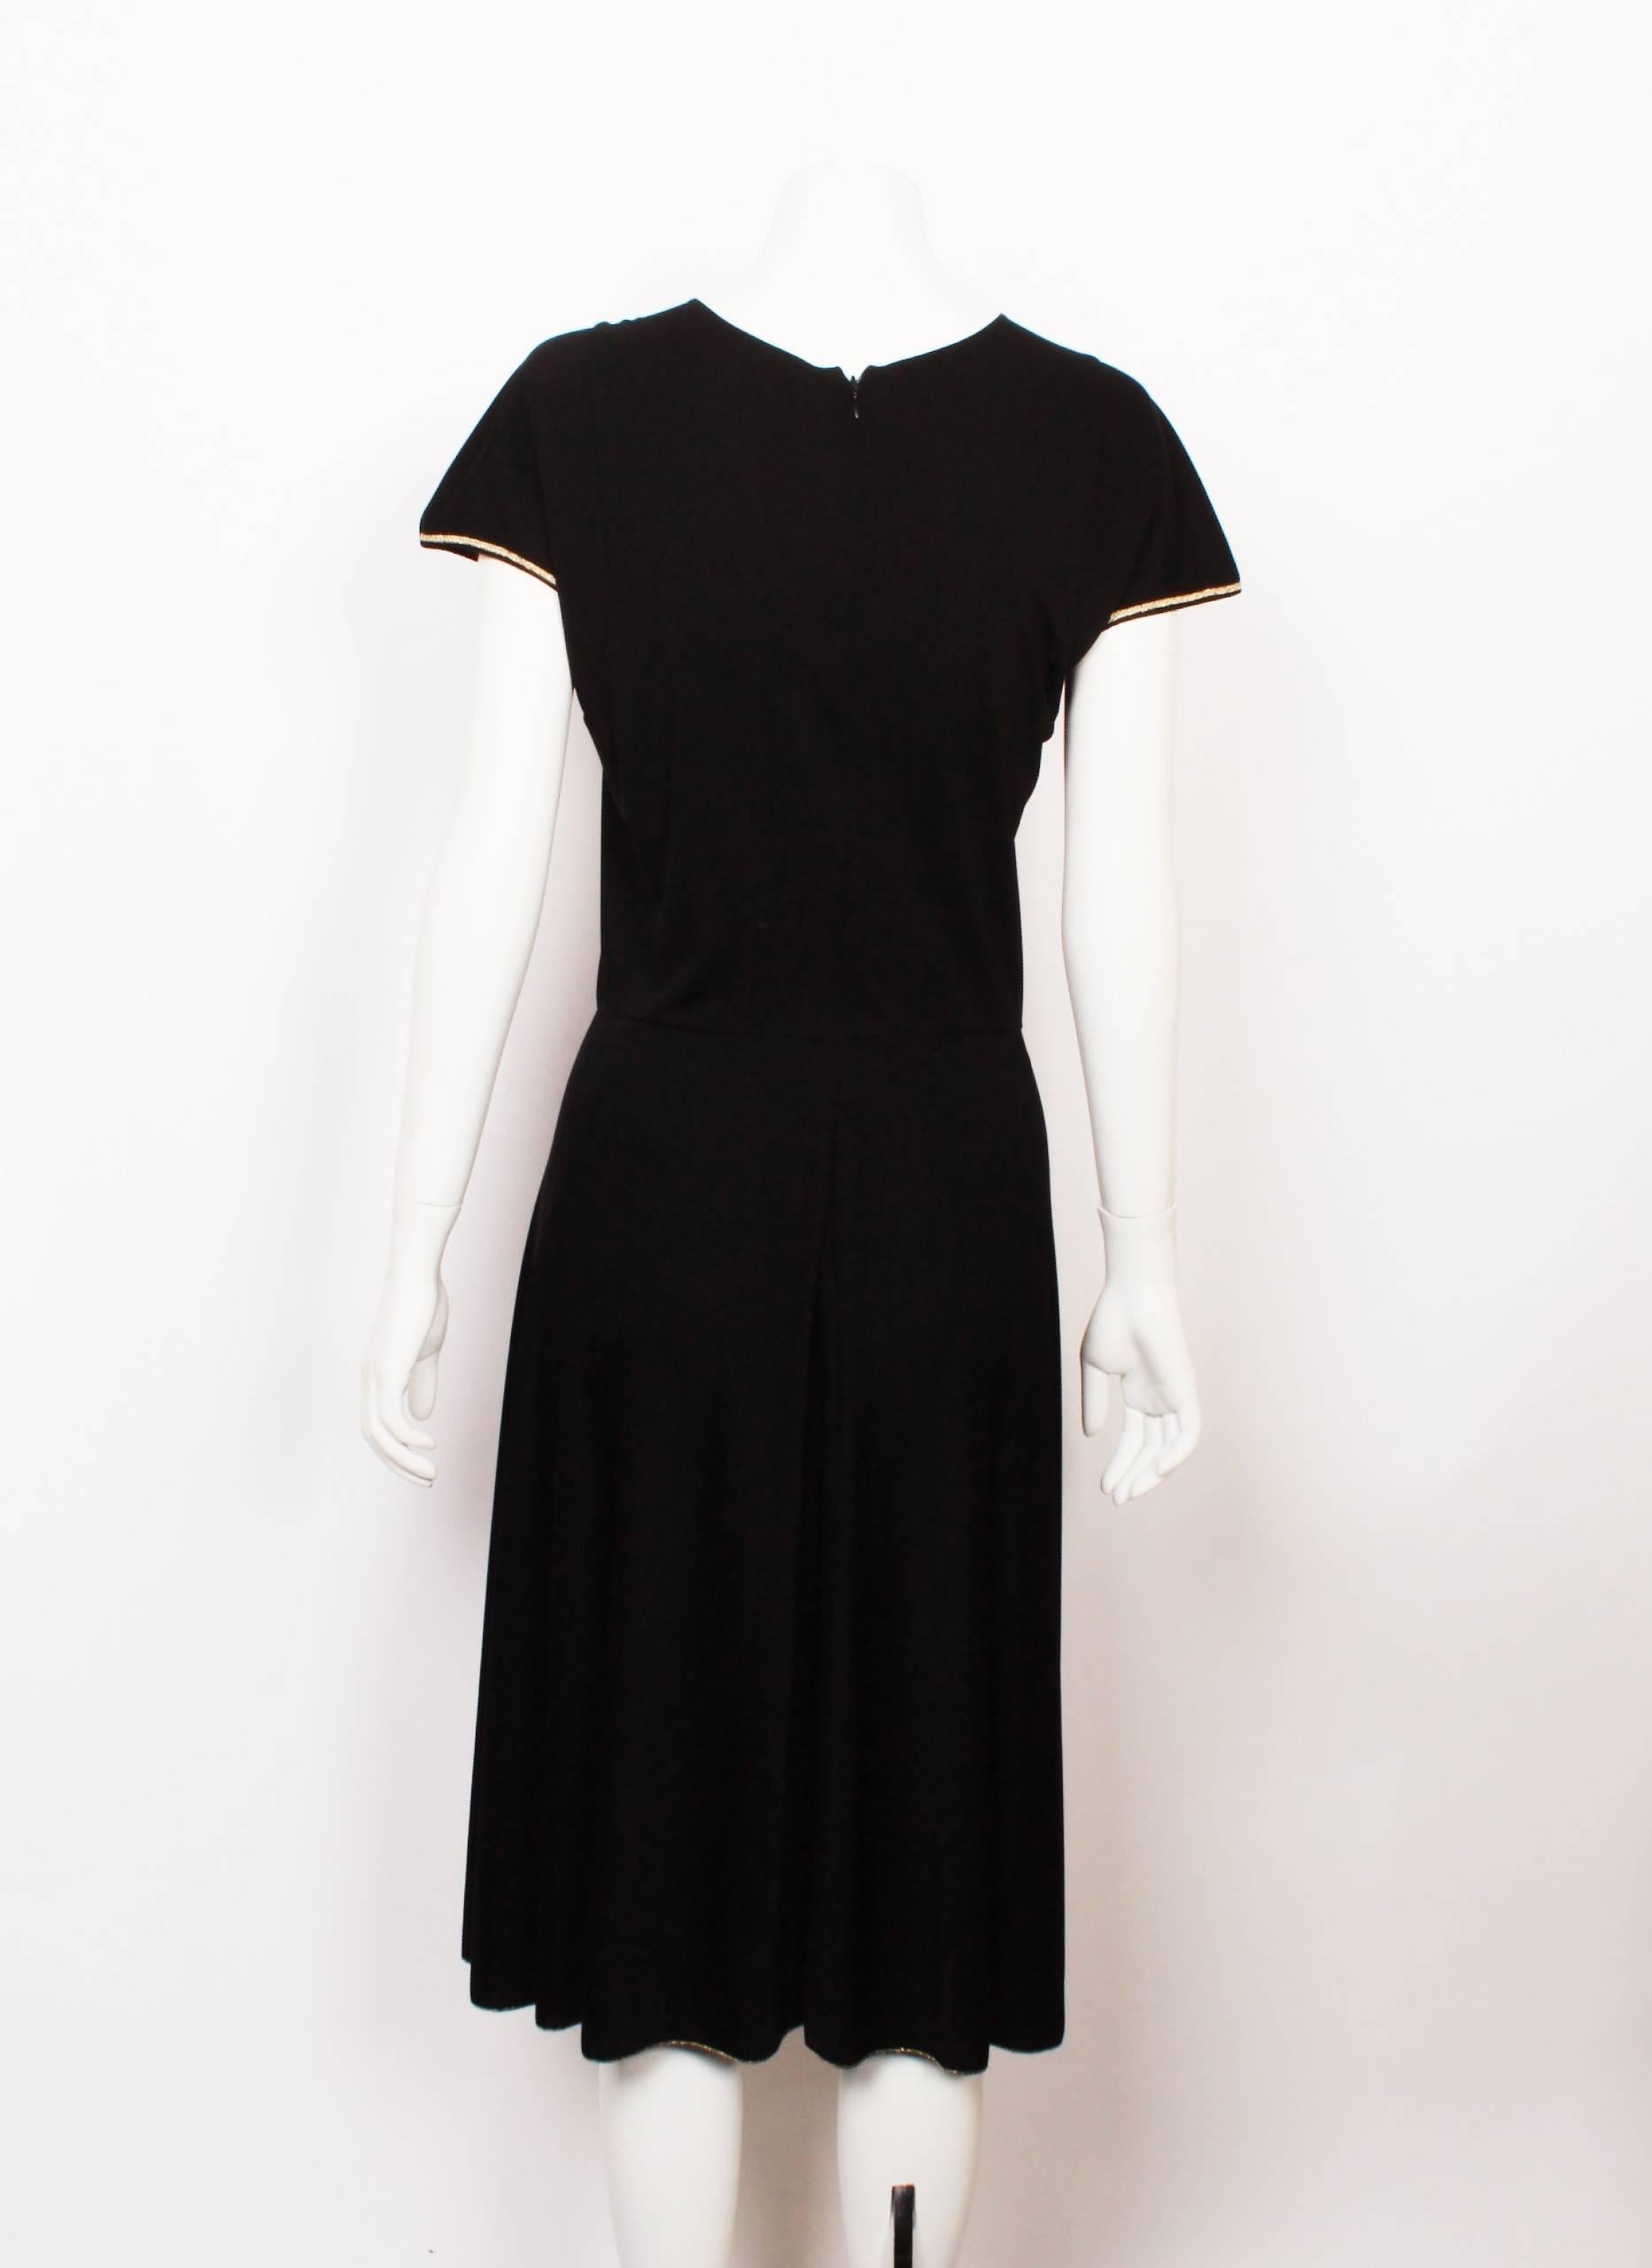 Yves Saint Laurent Black Knit Dress With Golden Trim - Spring/Summer 2011 In Good Condition In Melbourne, Victoria